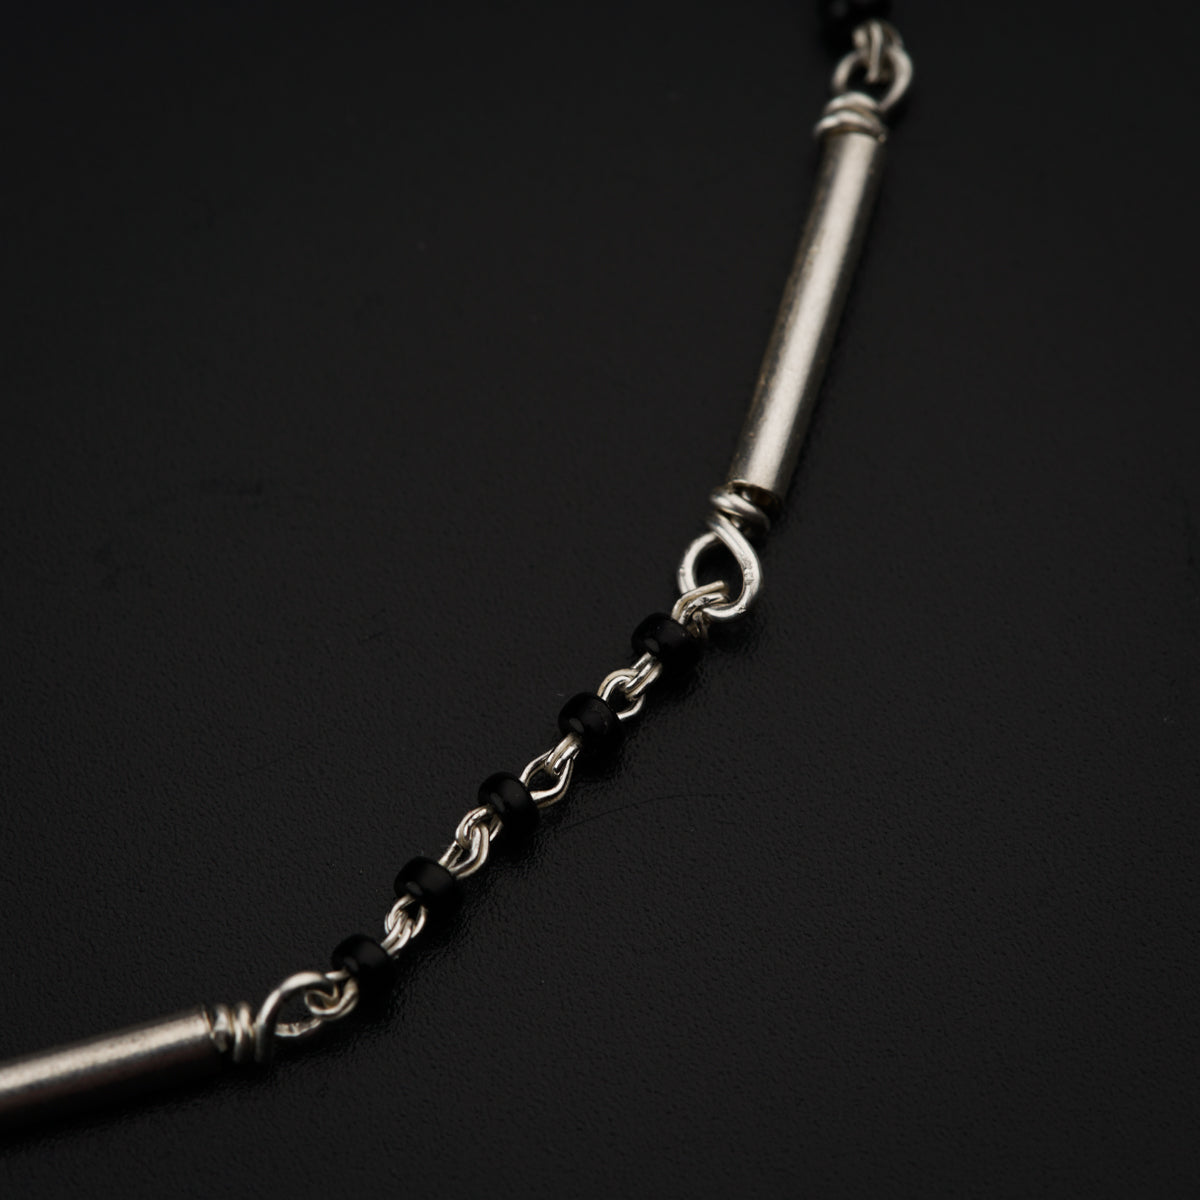 a silver chain with a black bead on it